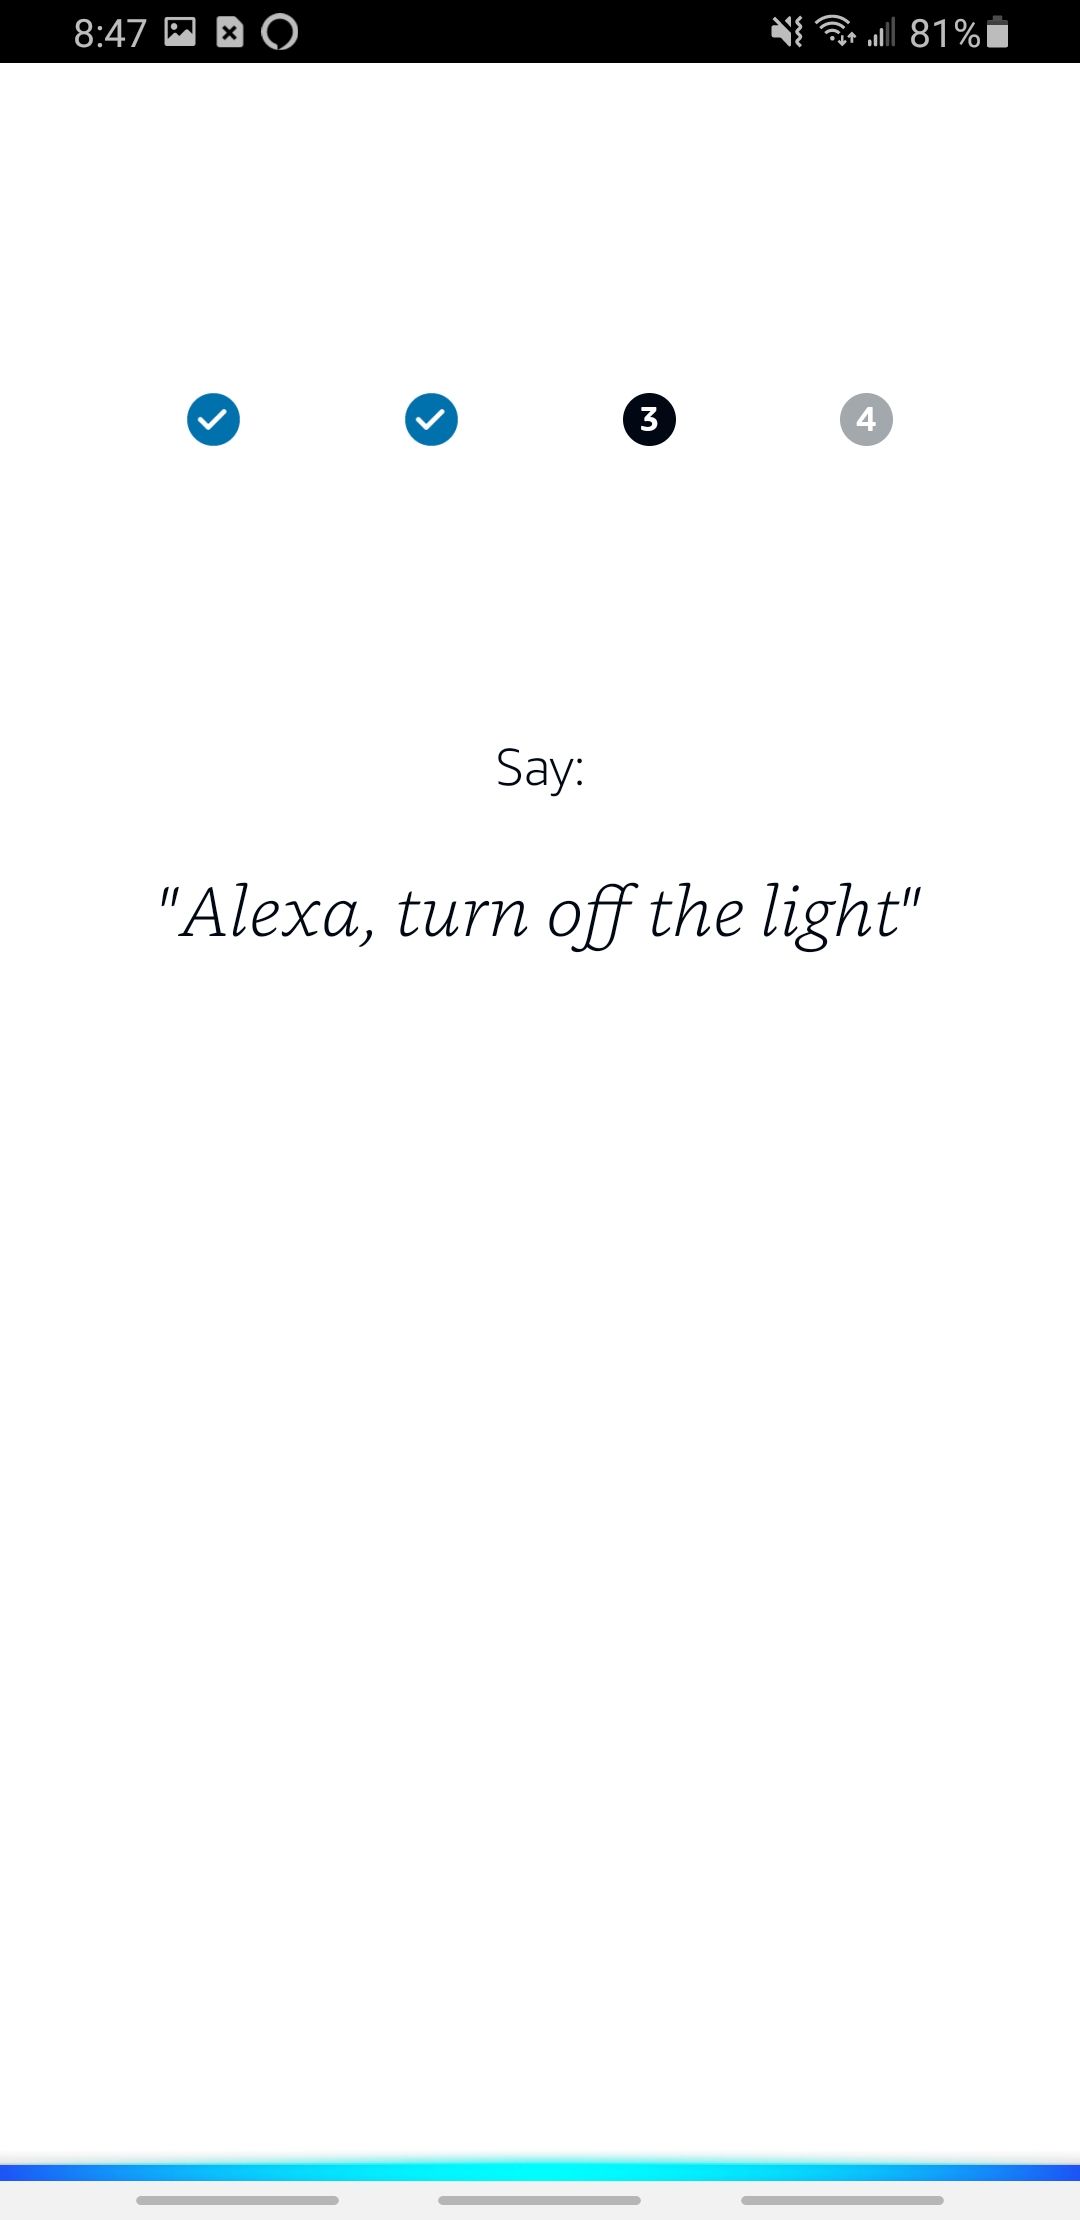 amazon alexa app saying things to learn your voice